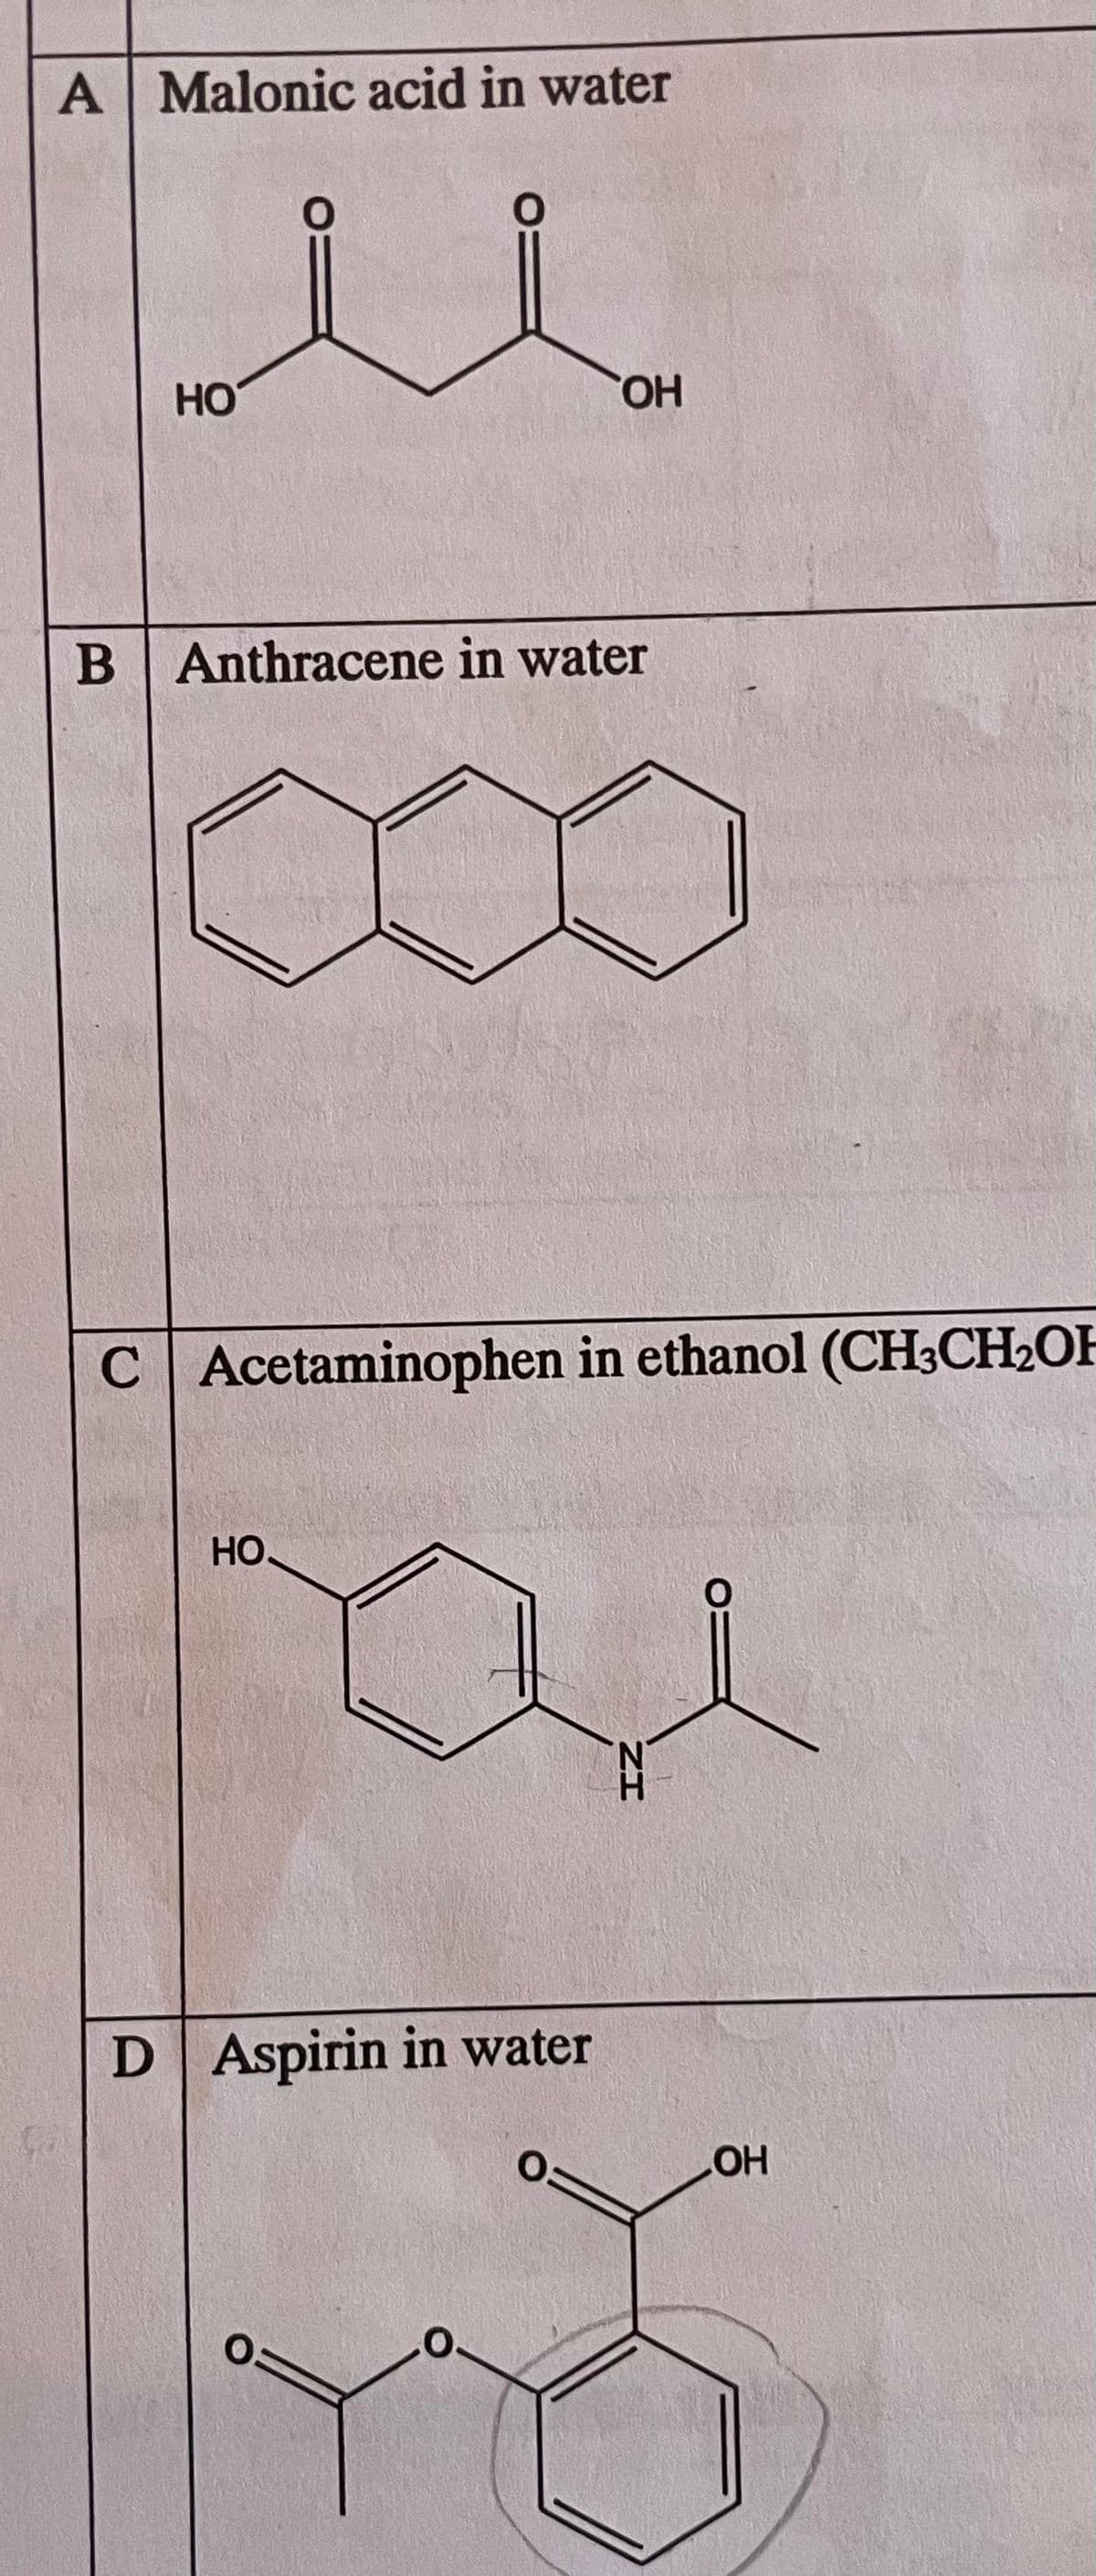 A Malonic acid in water
HO
O
B Anthracene in water
HO.
C Acetaminophen in ethanol (CH3CH₂OH
D Aspirin in water
O
OH
O:
ZH
OH